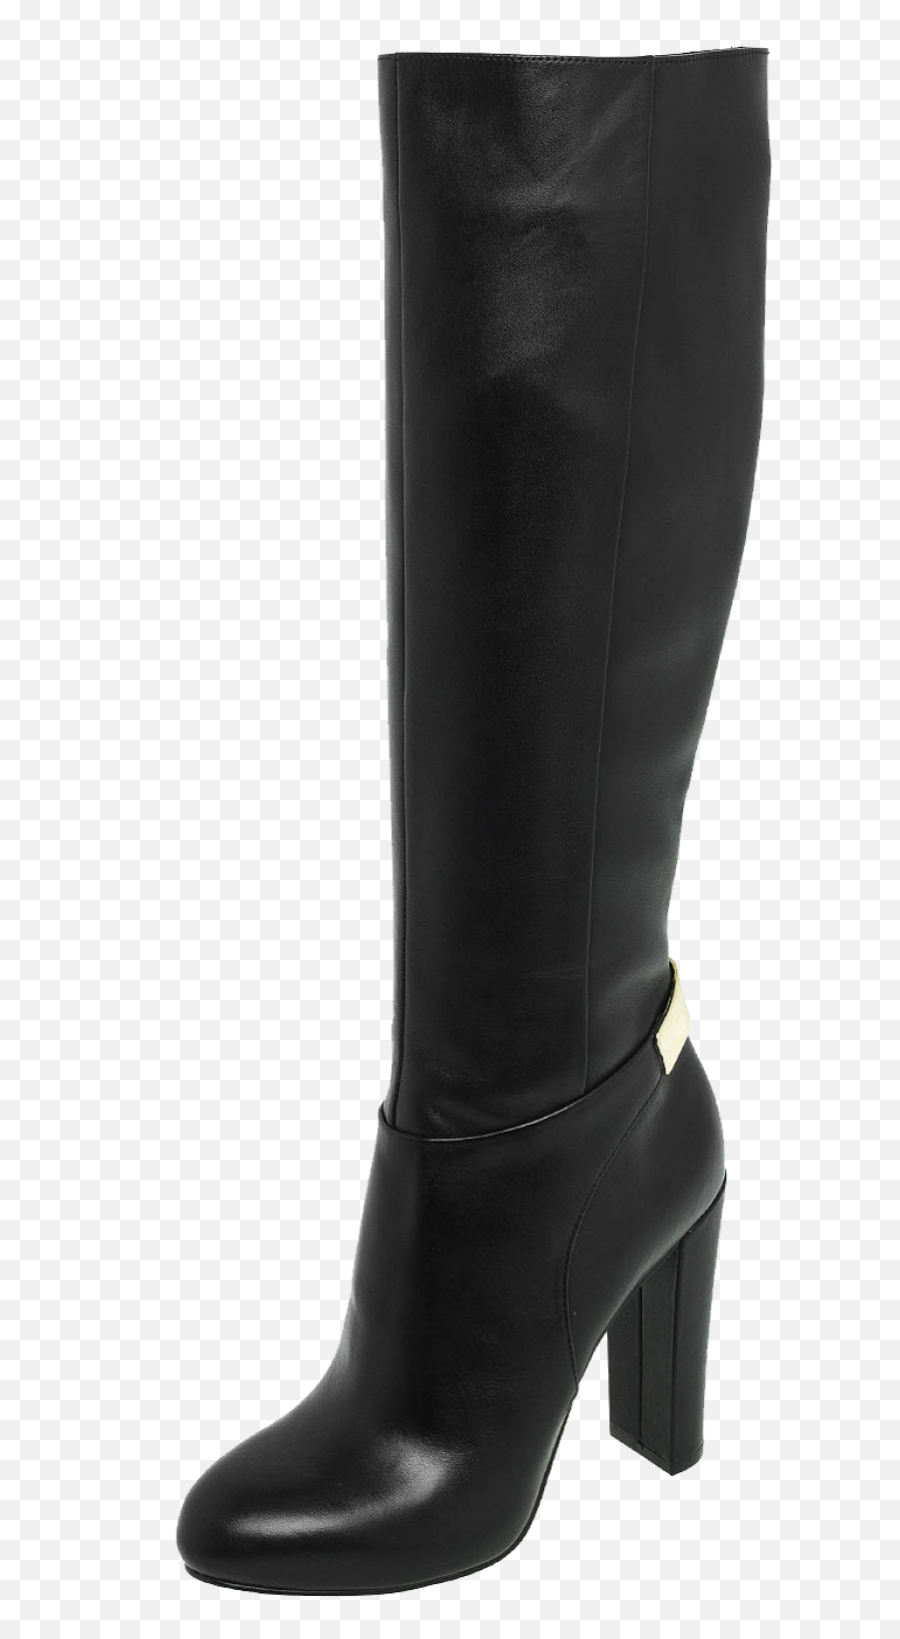 Hugo Boss Boots Womens Png Image - Purepng Free Black Boots Transparent Background,Boss Png